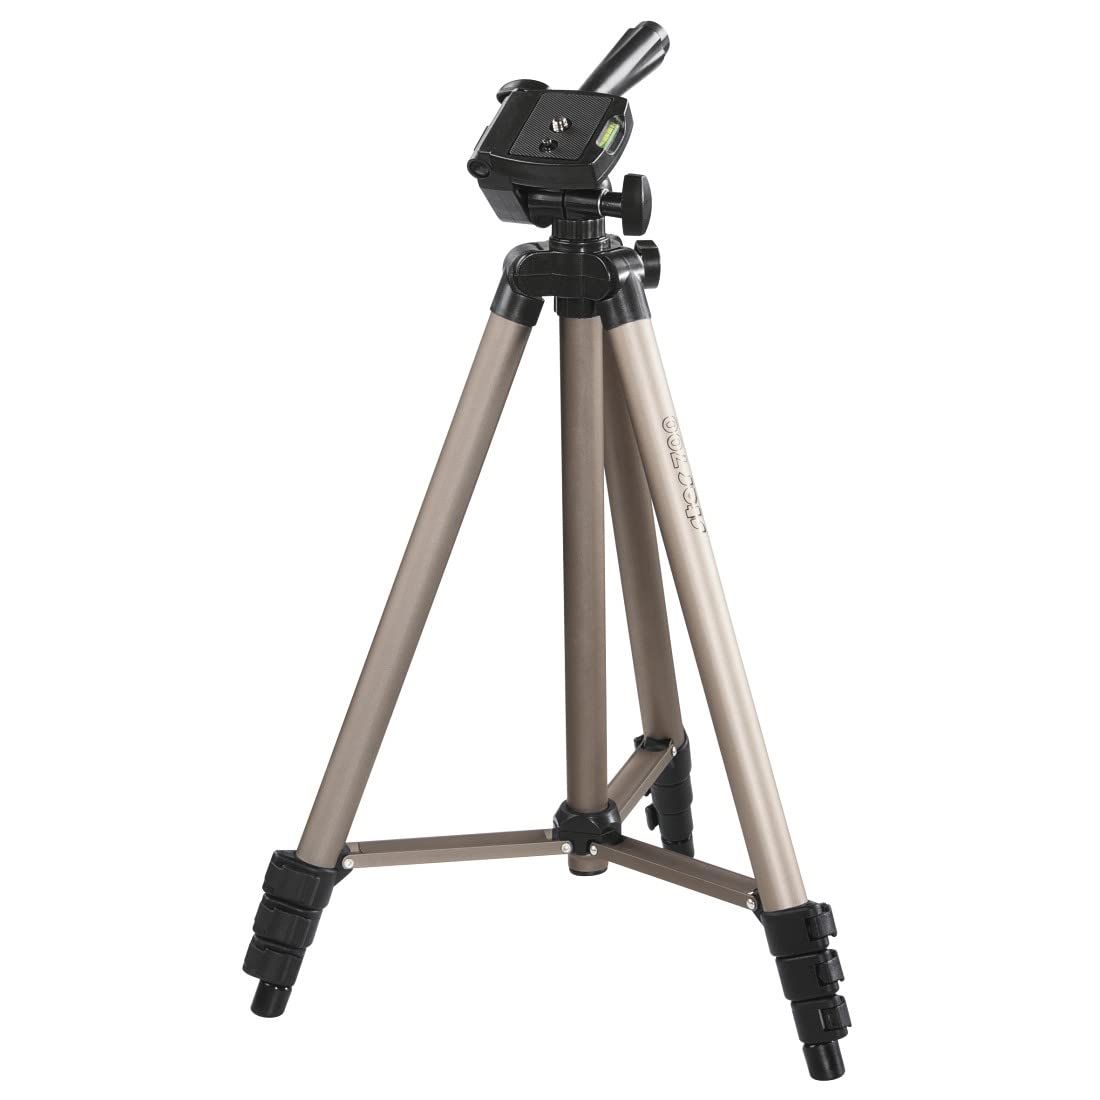 Hama Camera Tripod Star 700 EF (light tripod with 3-way head, photo tripod with 42.5-125cm height, tripod incl. carrying case, camera tripod suitable for SLR and system cameras), Champagne